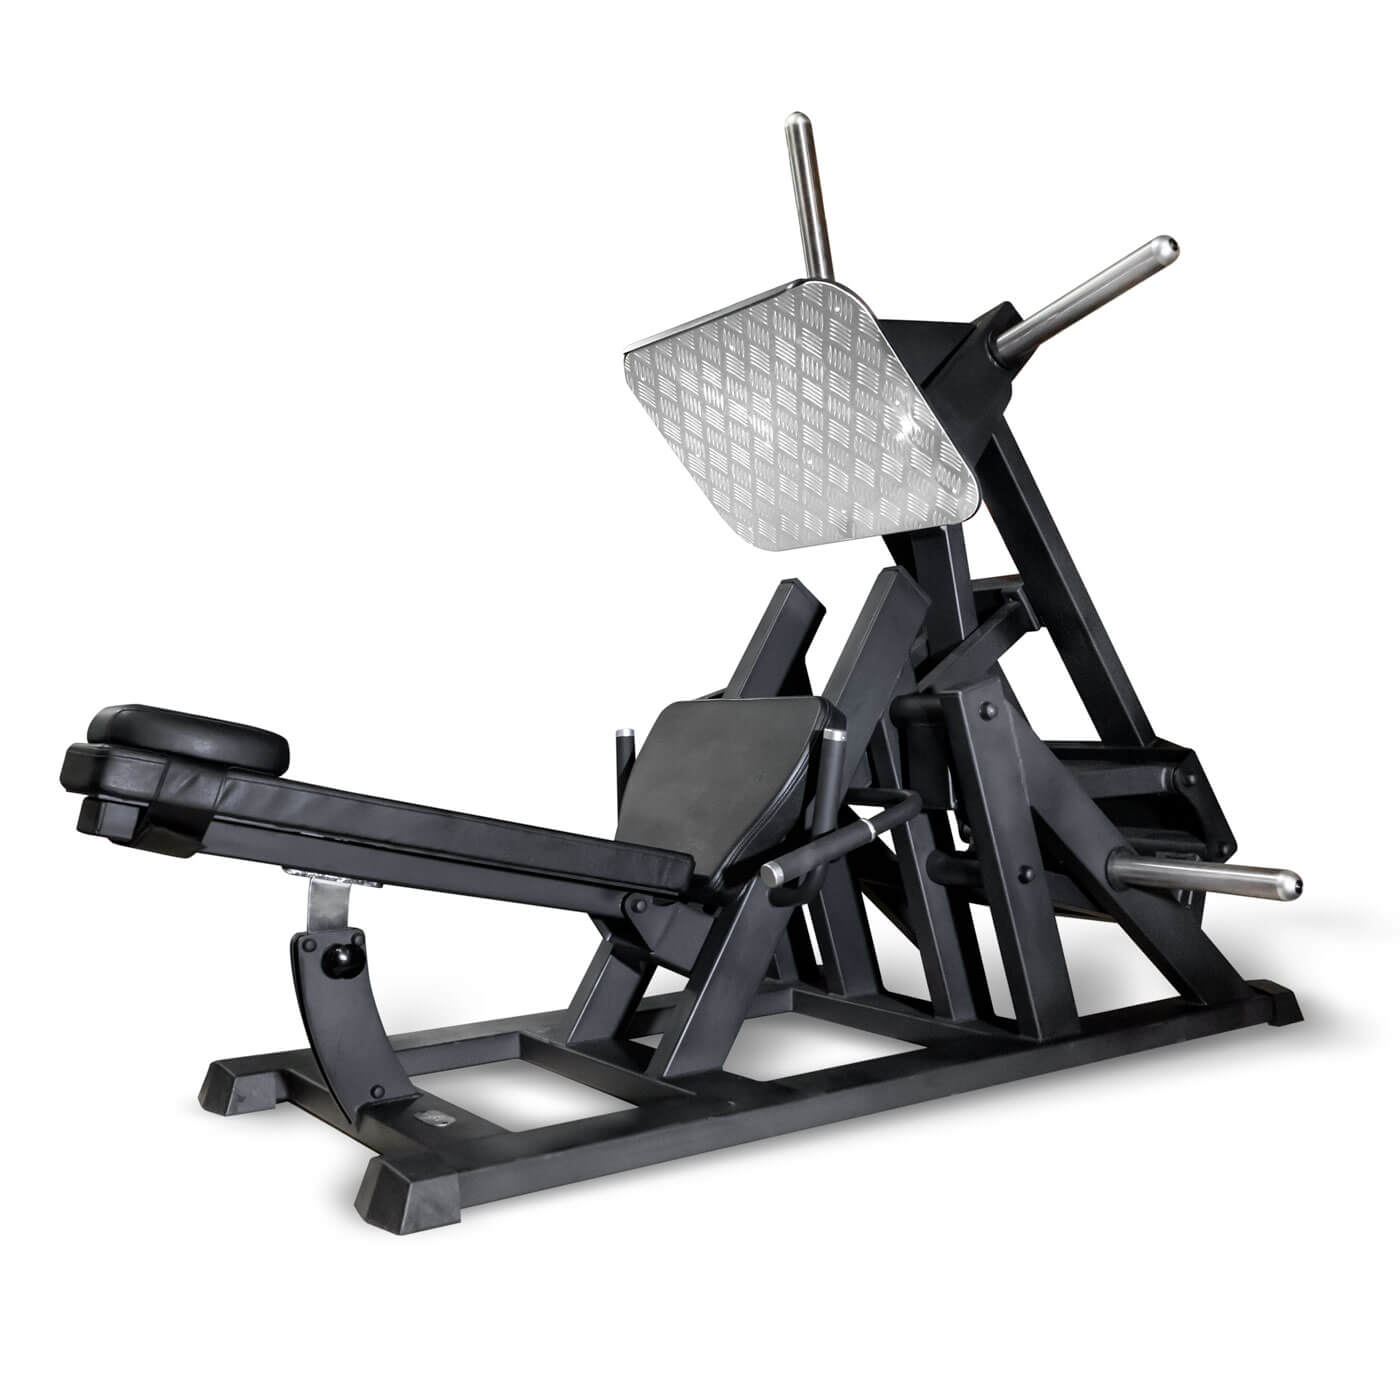 Buy Prime Strive Plate Loaded ISO Lateral Horizontal Flat & Incline Chest  Press w/Smart Strength Technology Online